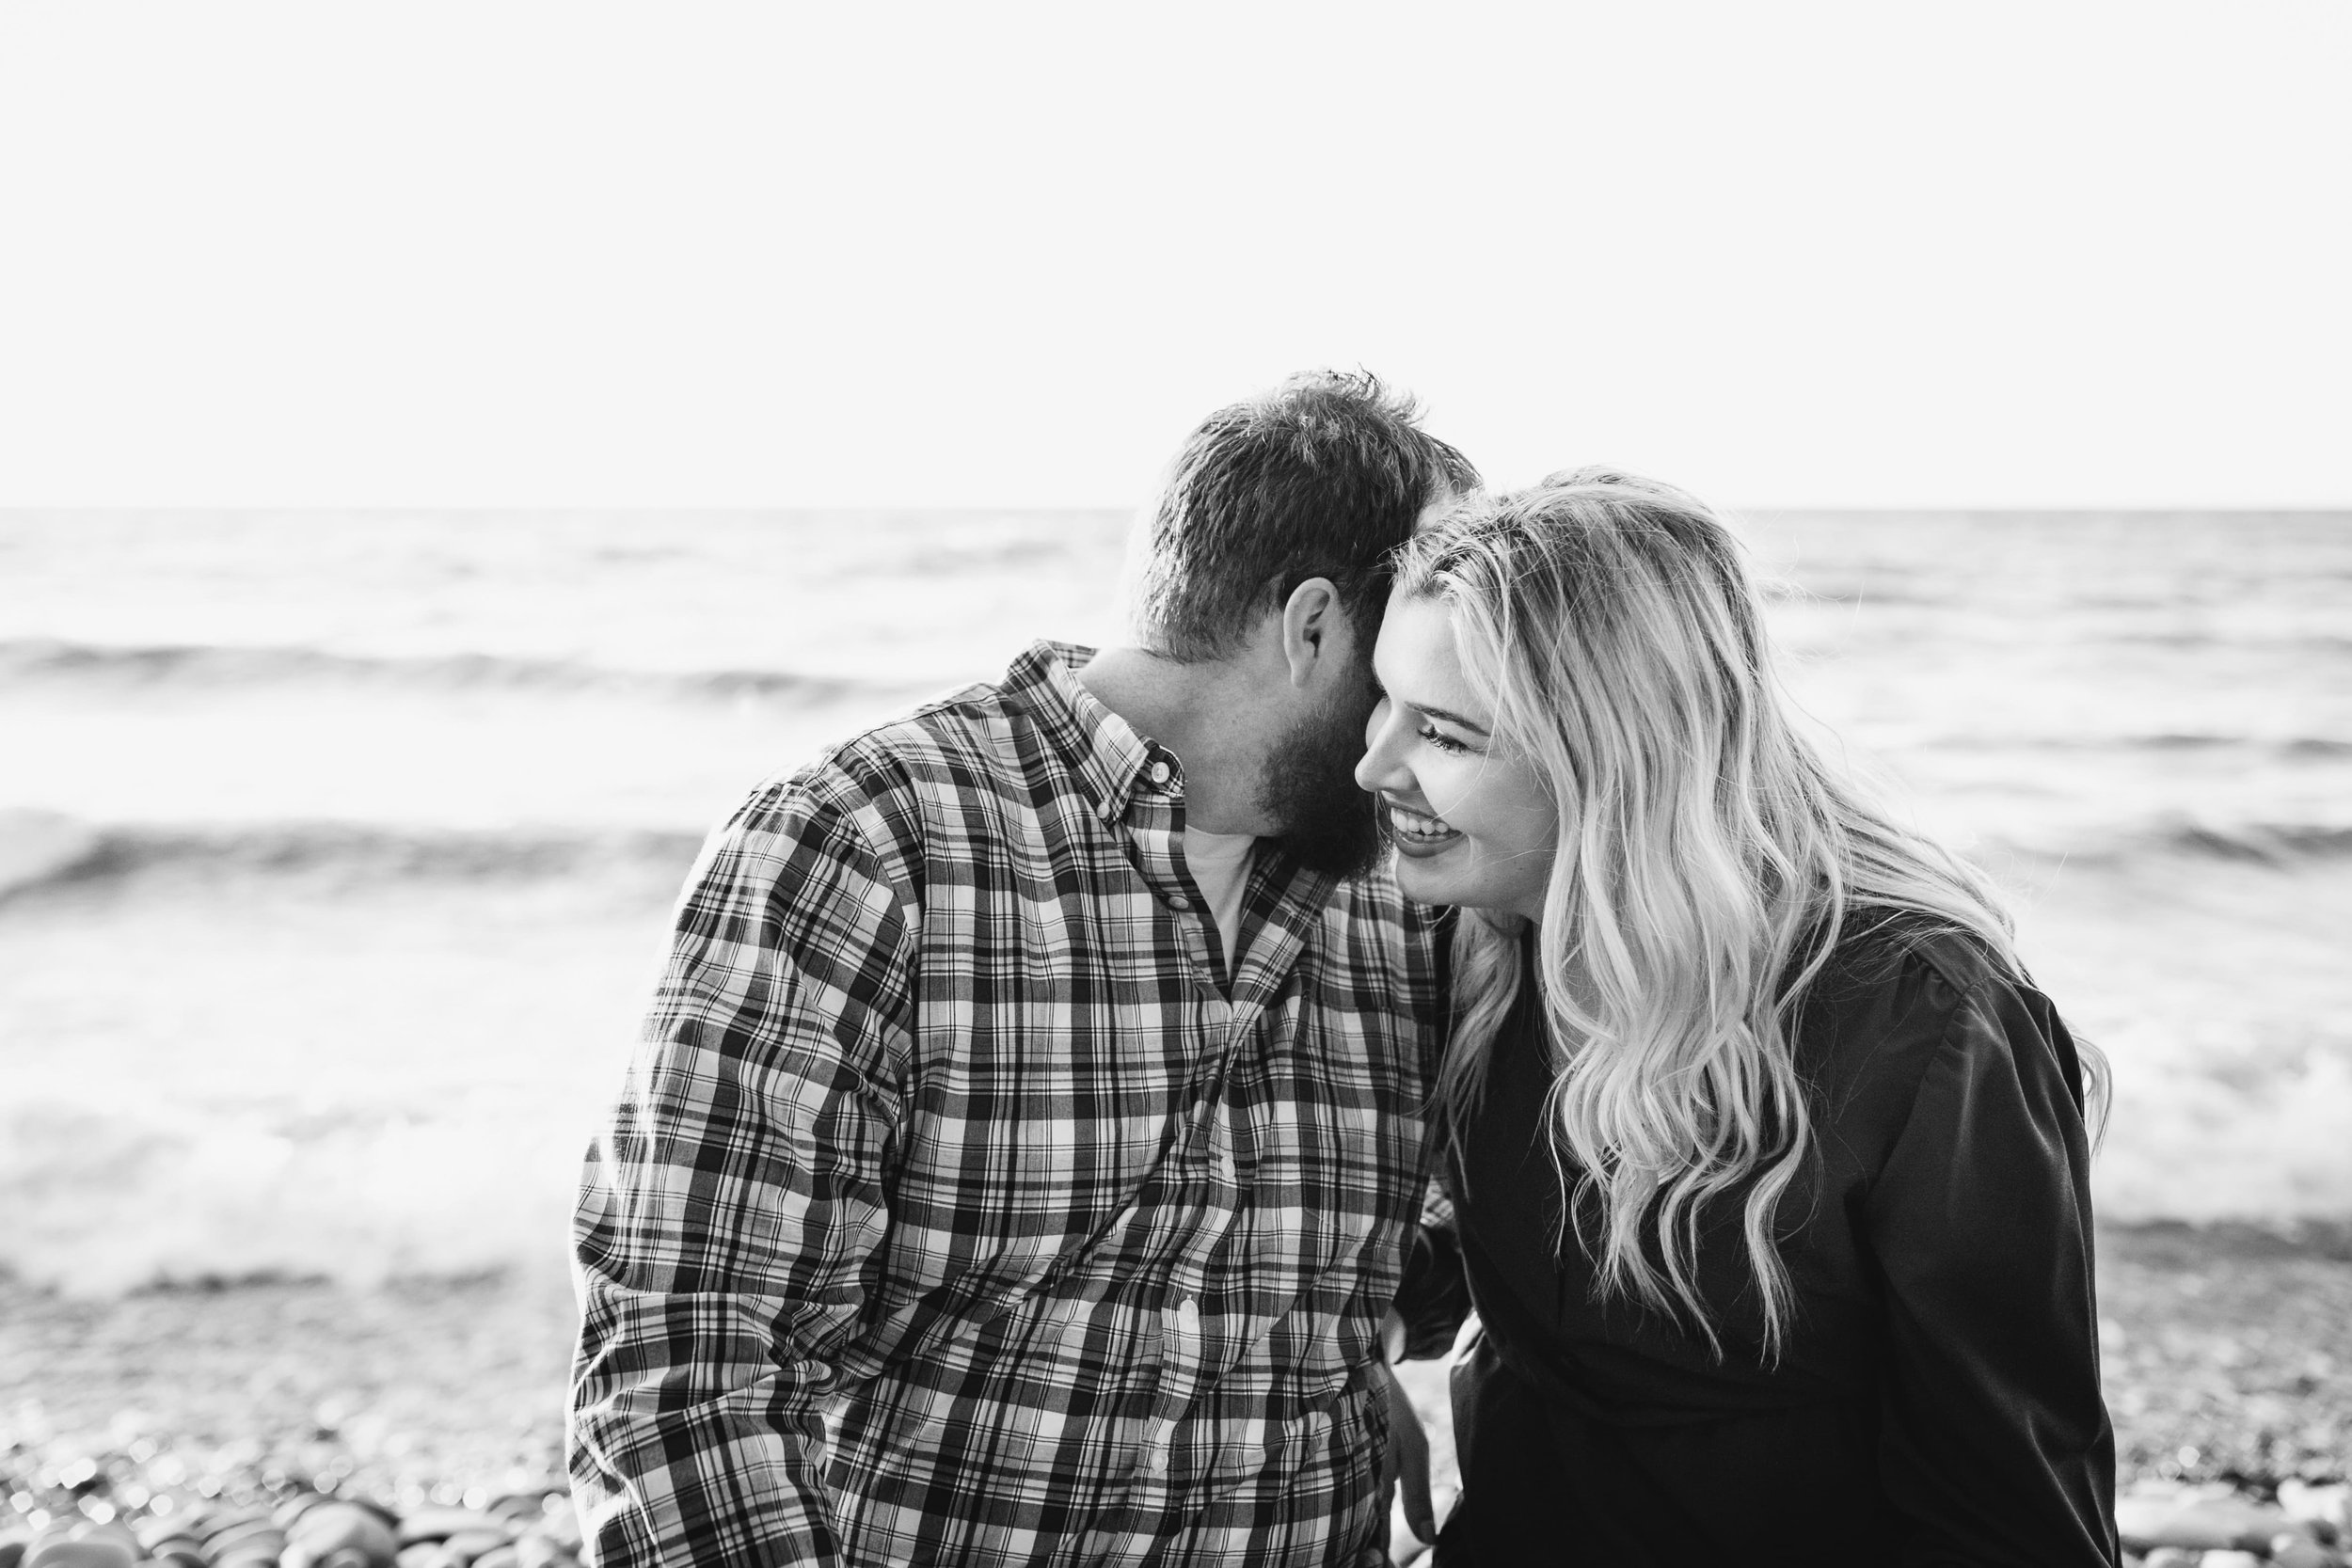  danielle laughs as she presses her cheek to anthony’s face who is seemingly whispering in her ear as they sit in front of a great lake for their lake engagement photos 